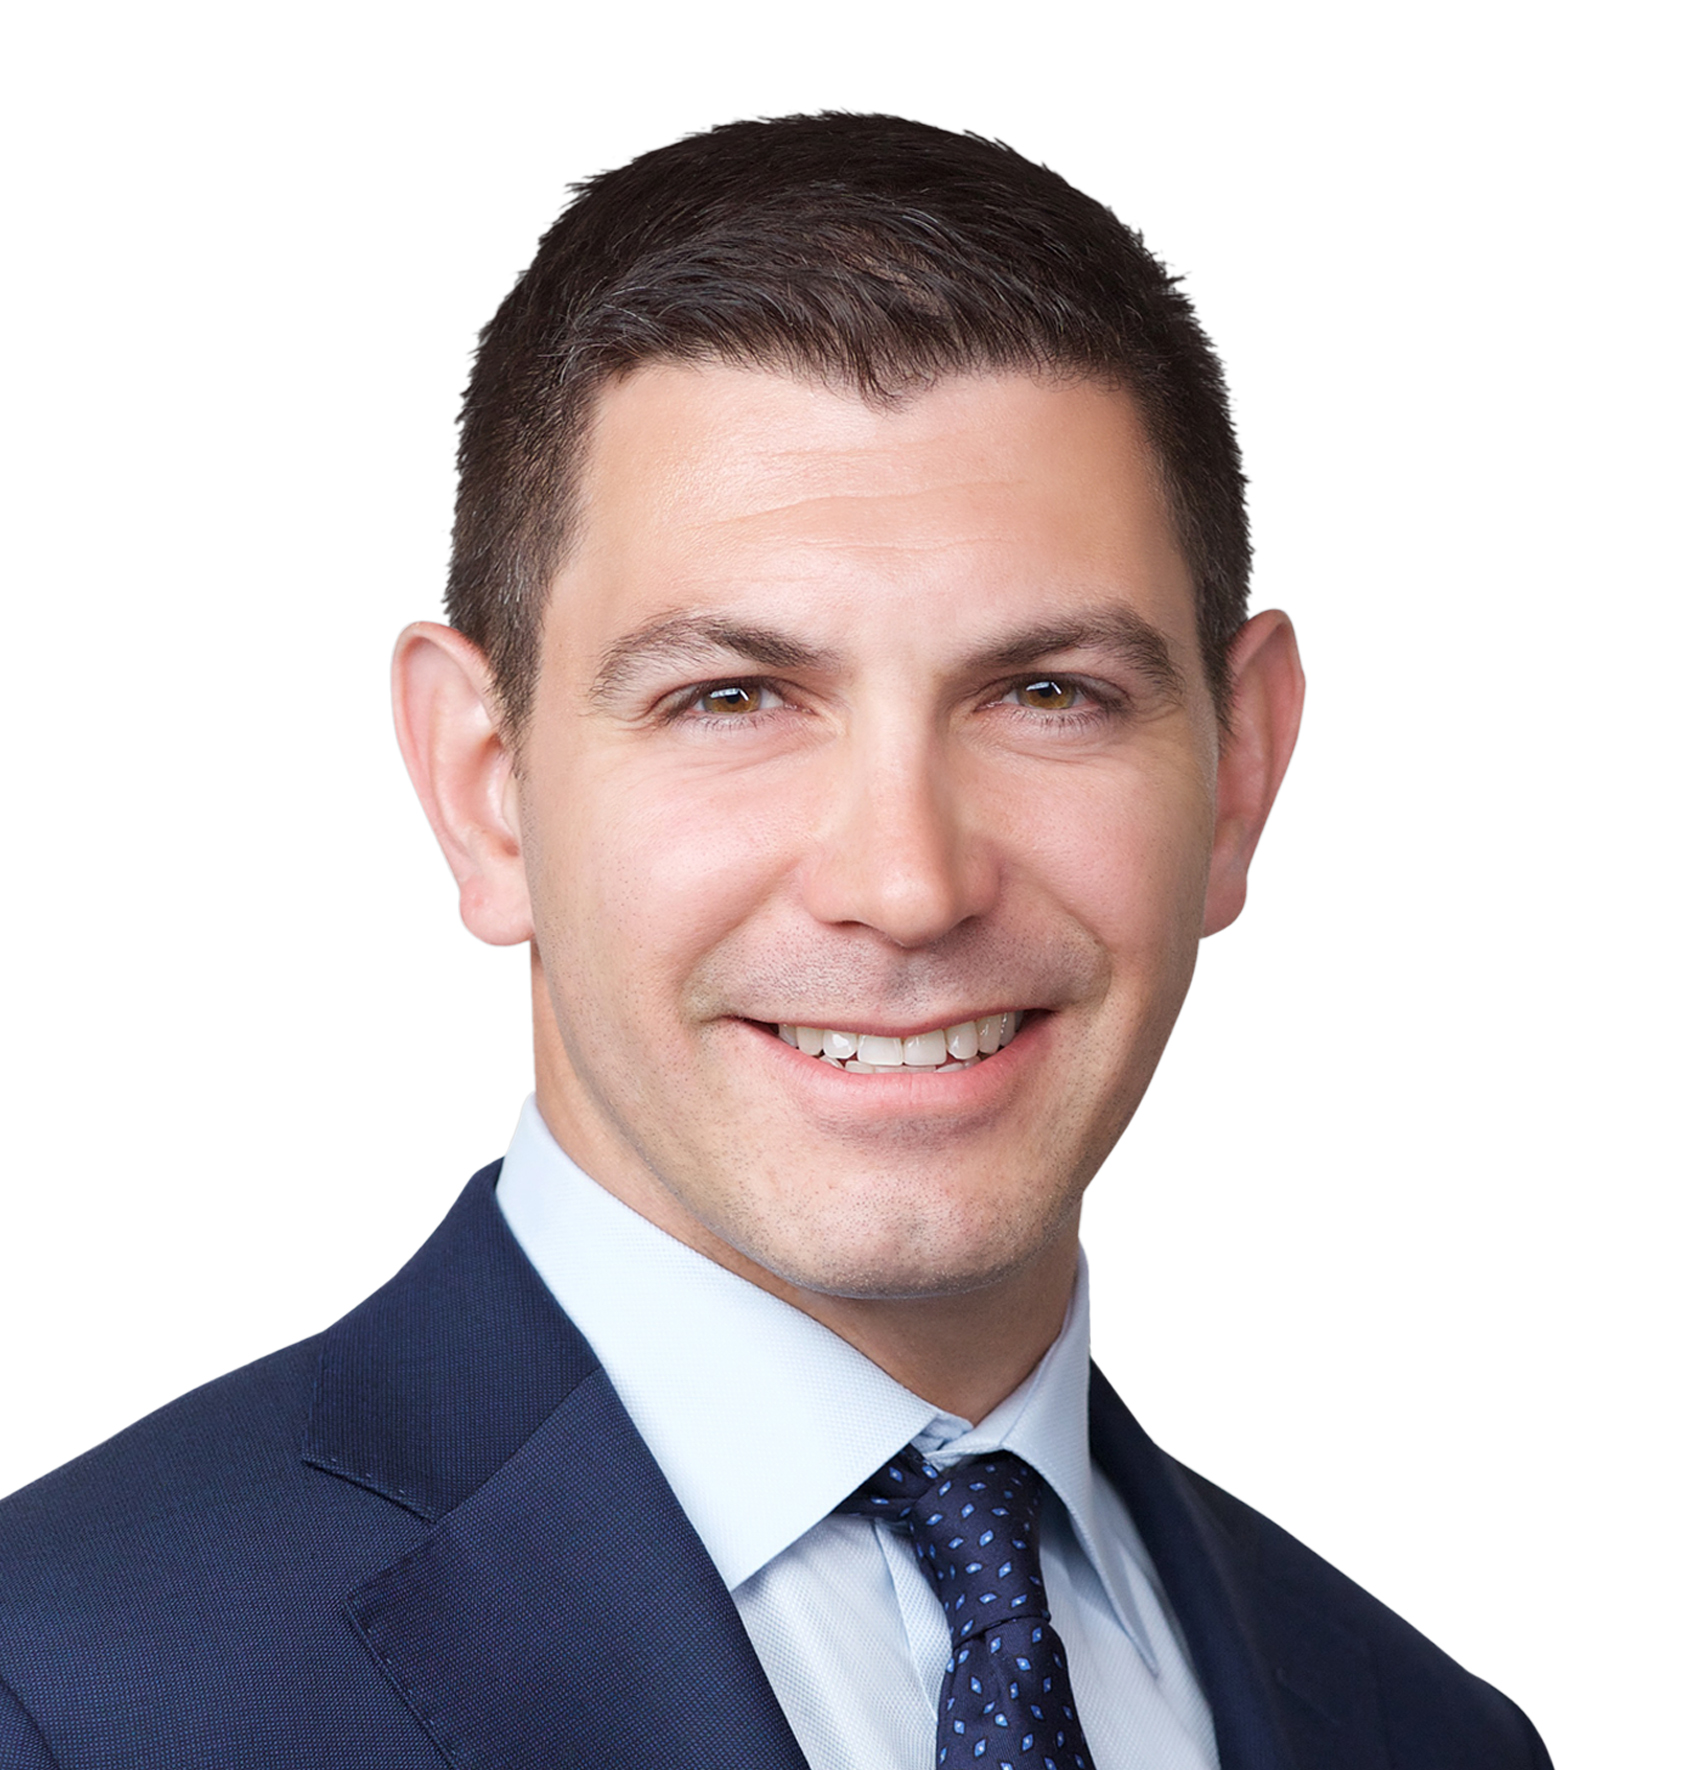 Portage Point Bolsters Middle Market Investment Banking Practice with Addition of Adam Waldman